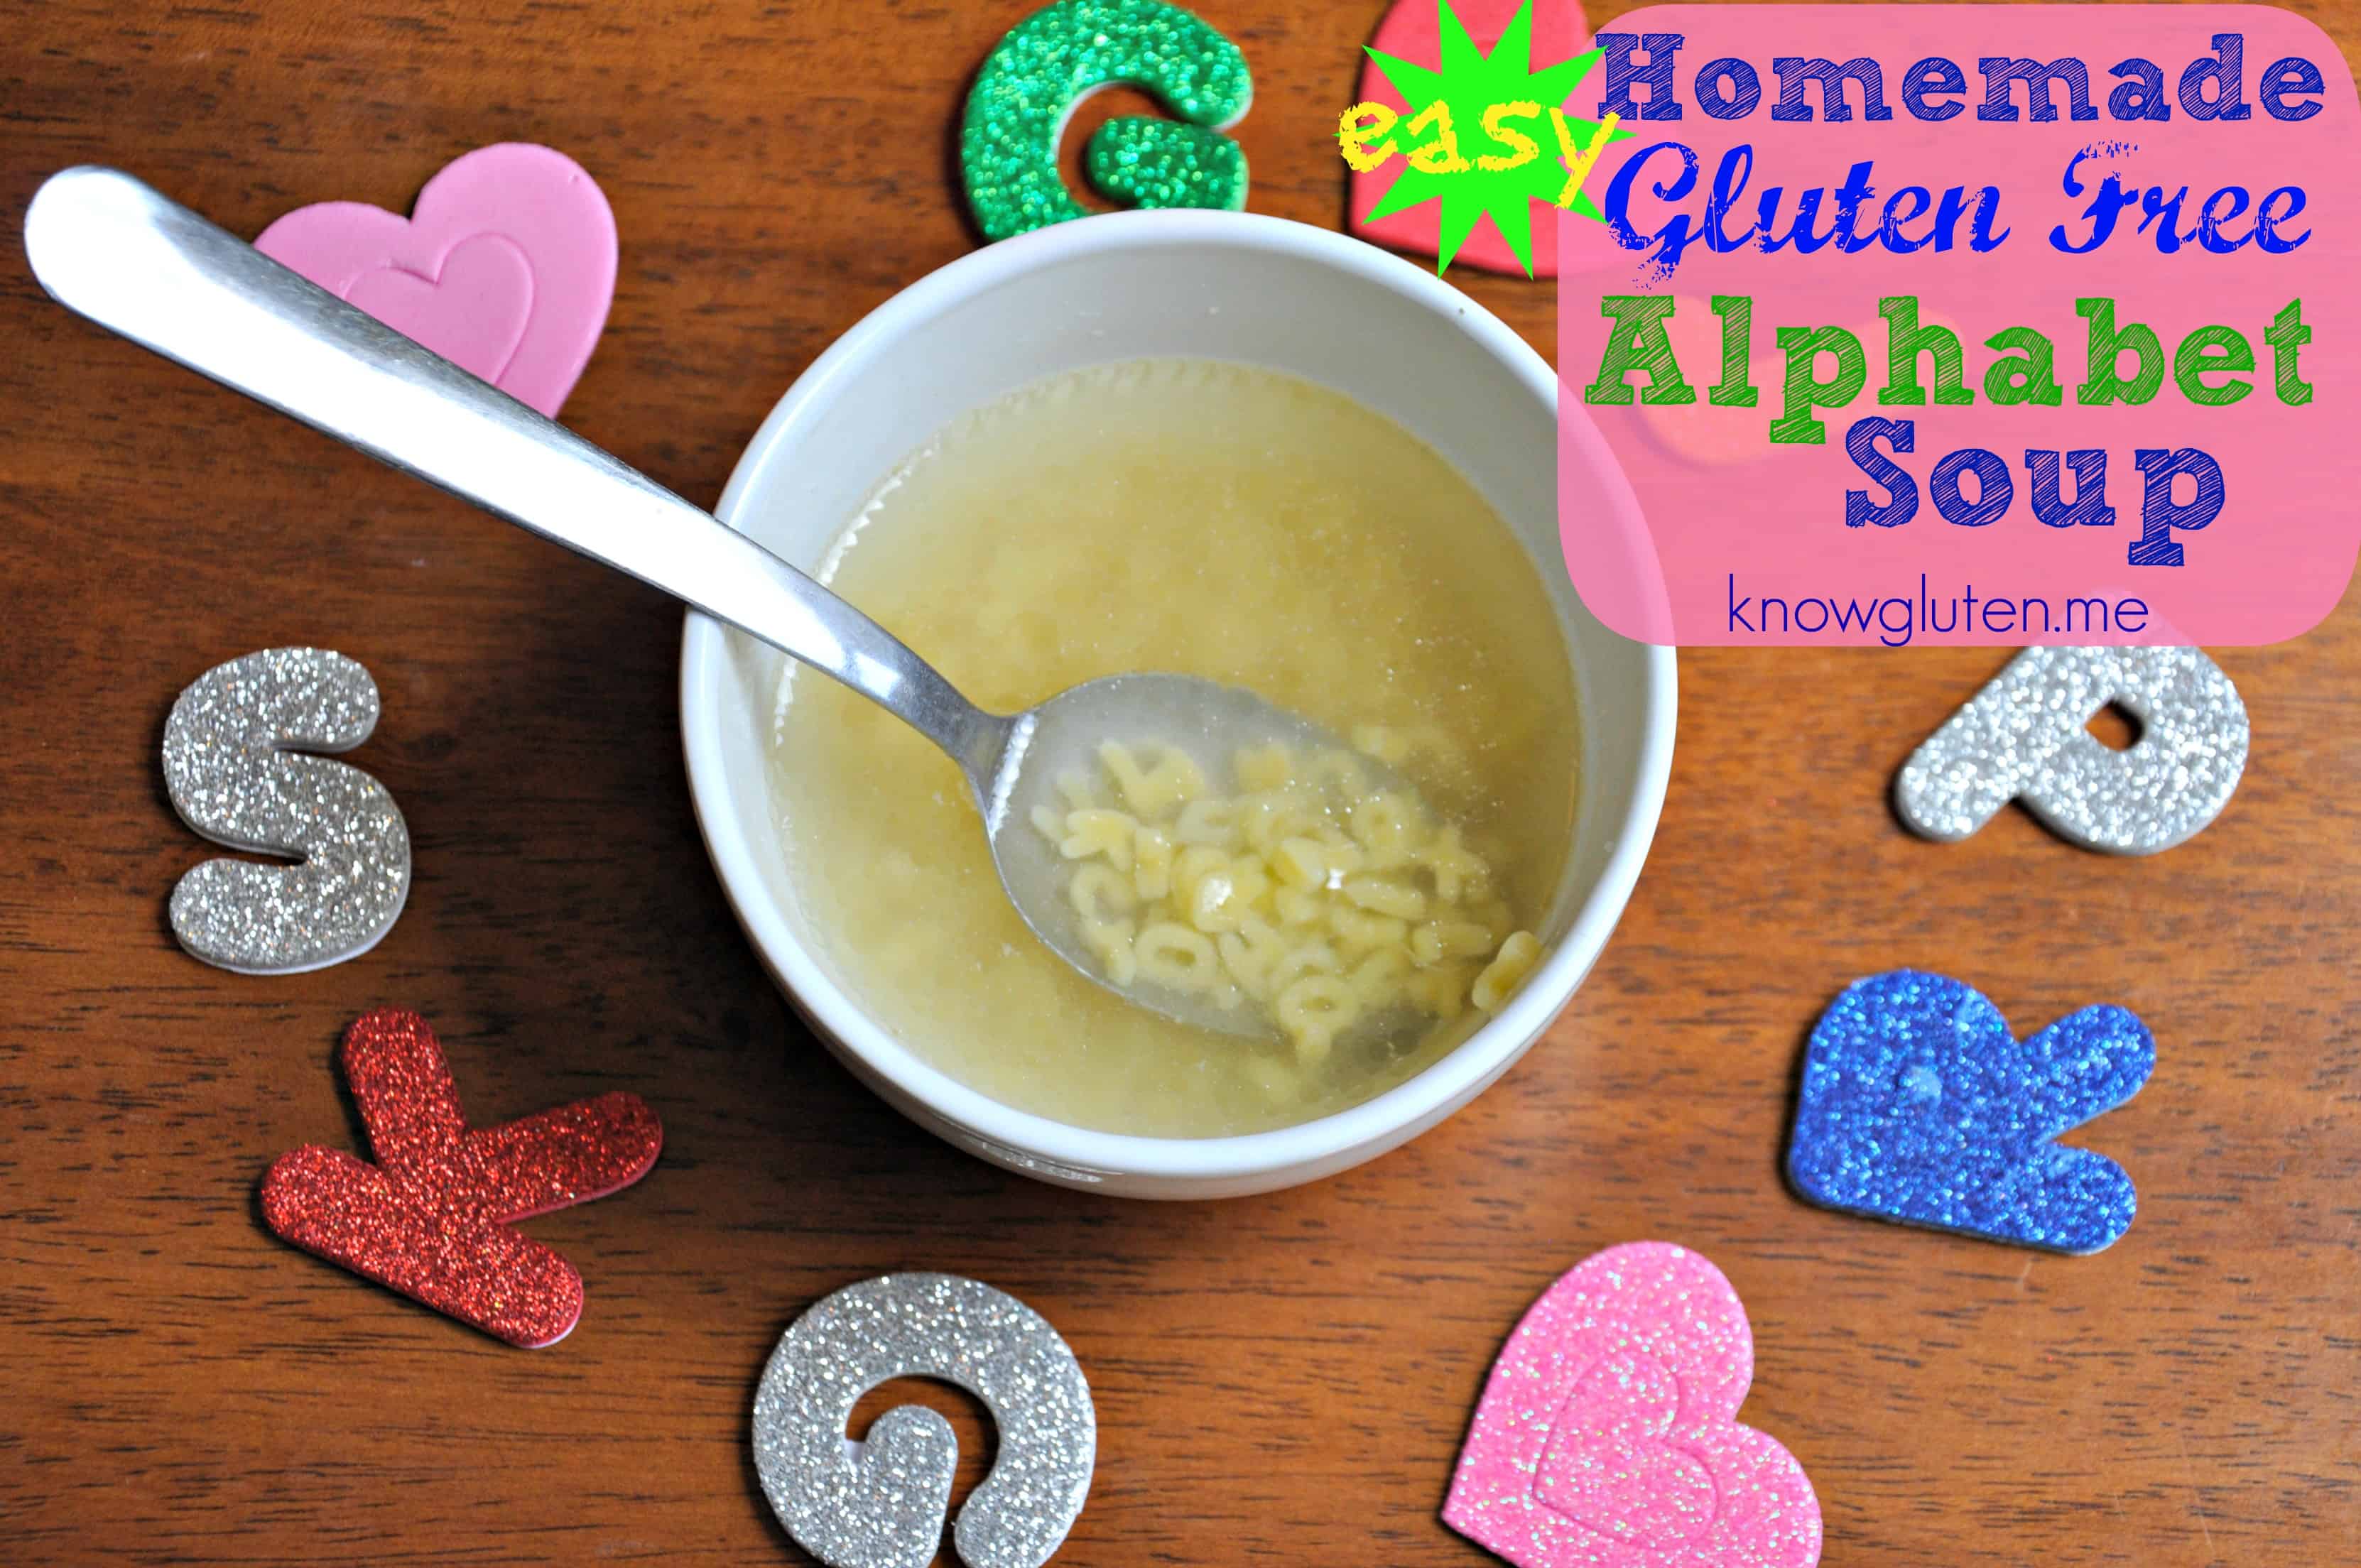 Easy Homemade Gluten Free Alphabet Soup from knowgluten.me - Homemade soup may take a little time on the stove, but it's super simple to make! Directions here!